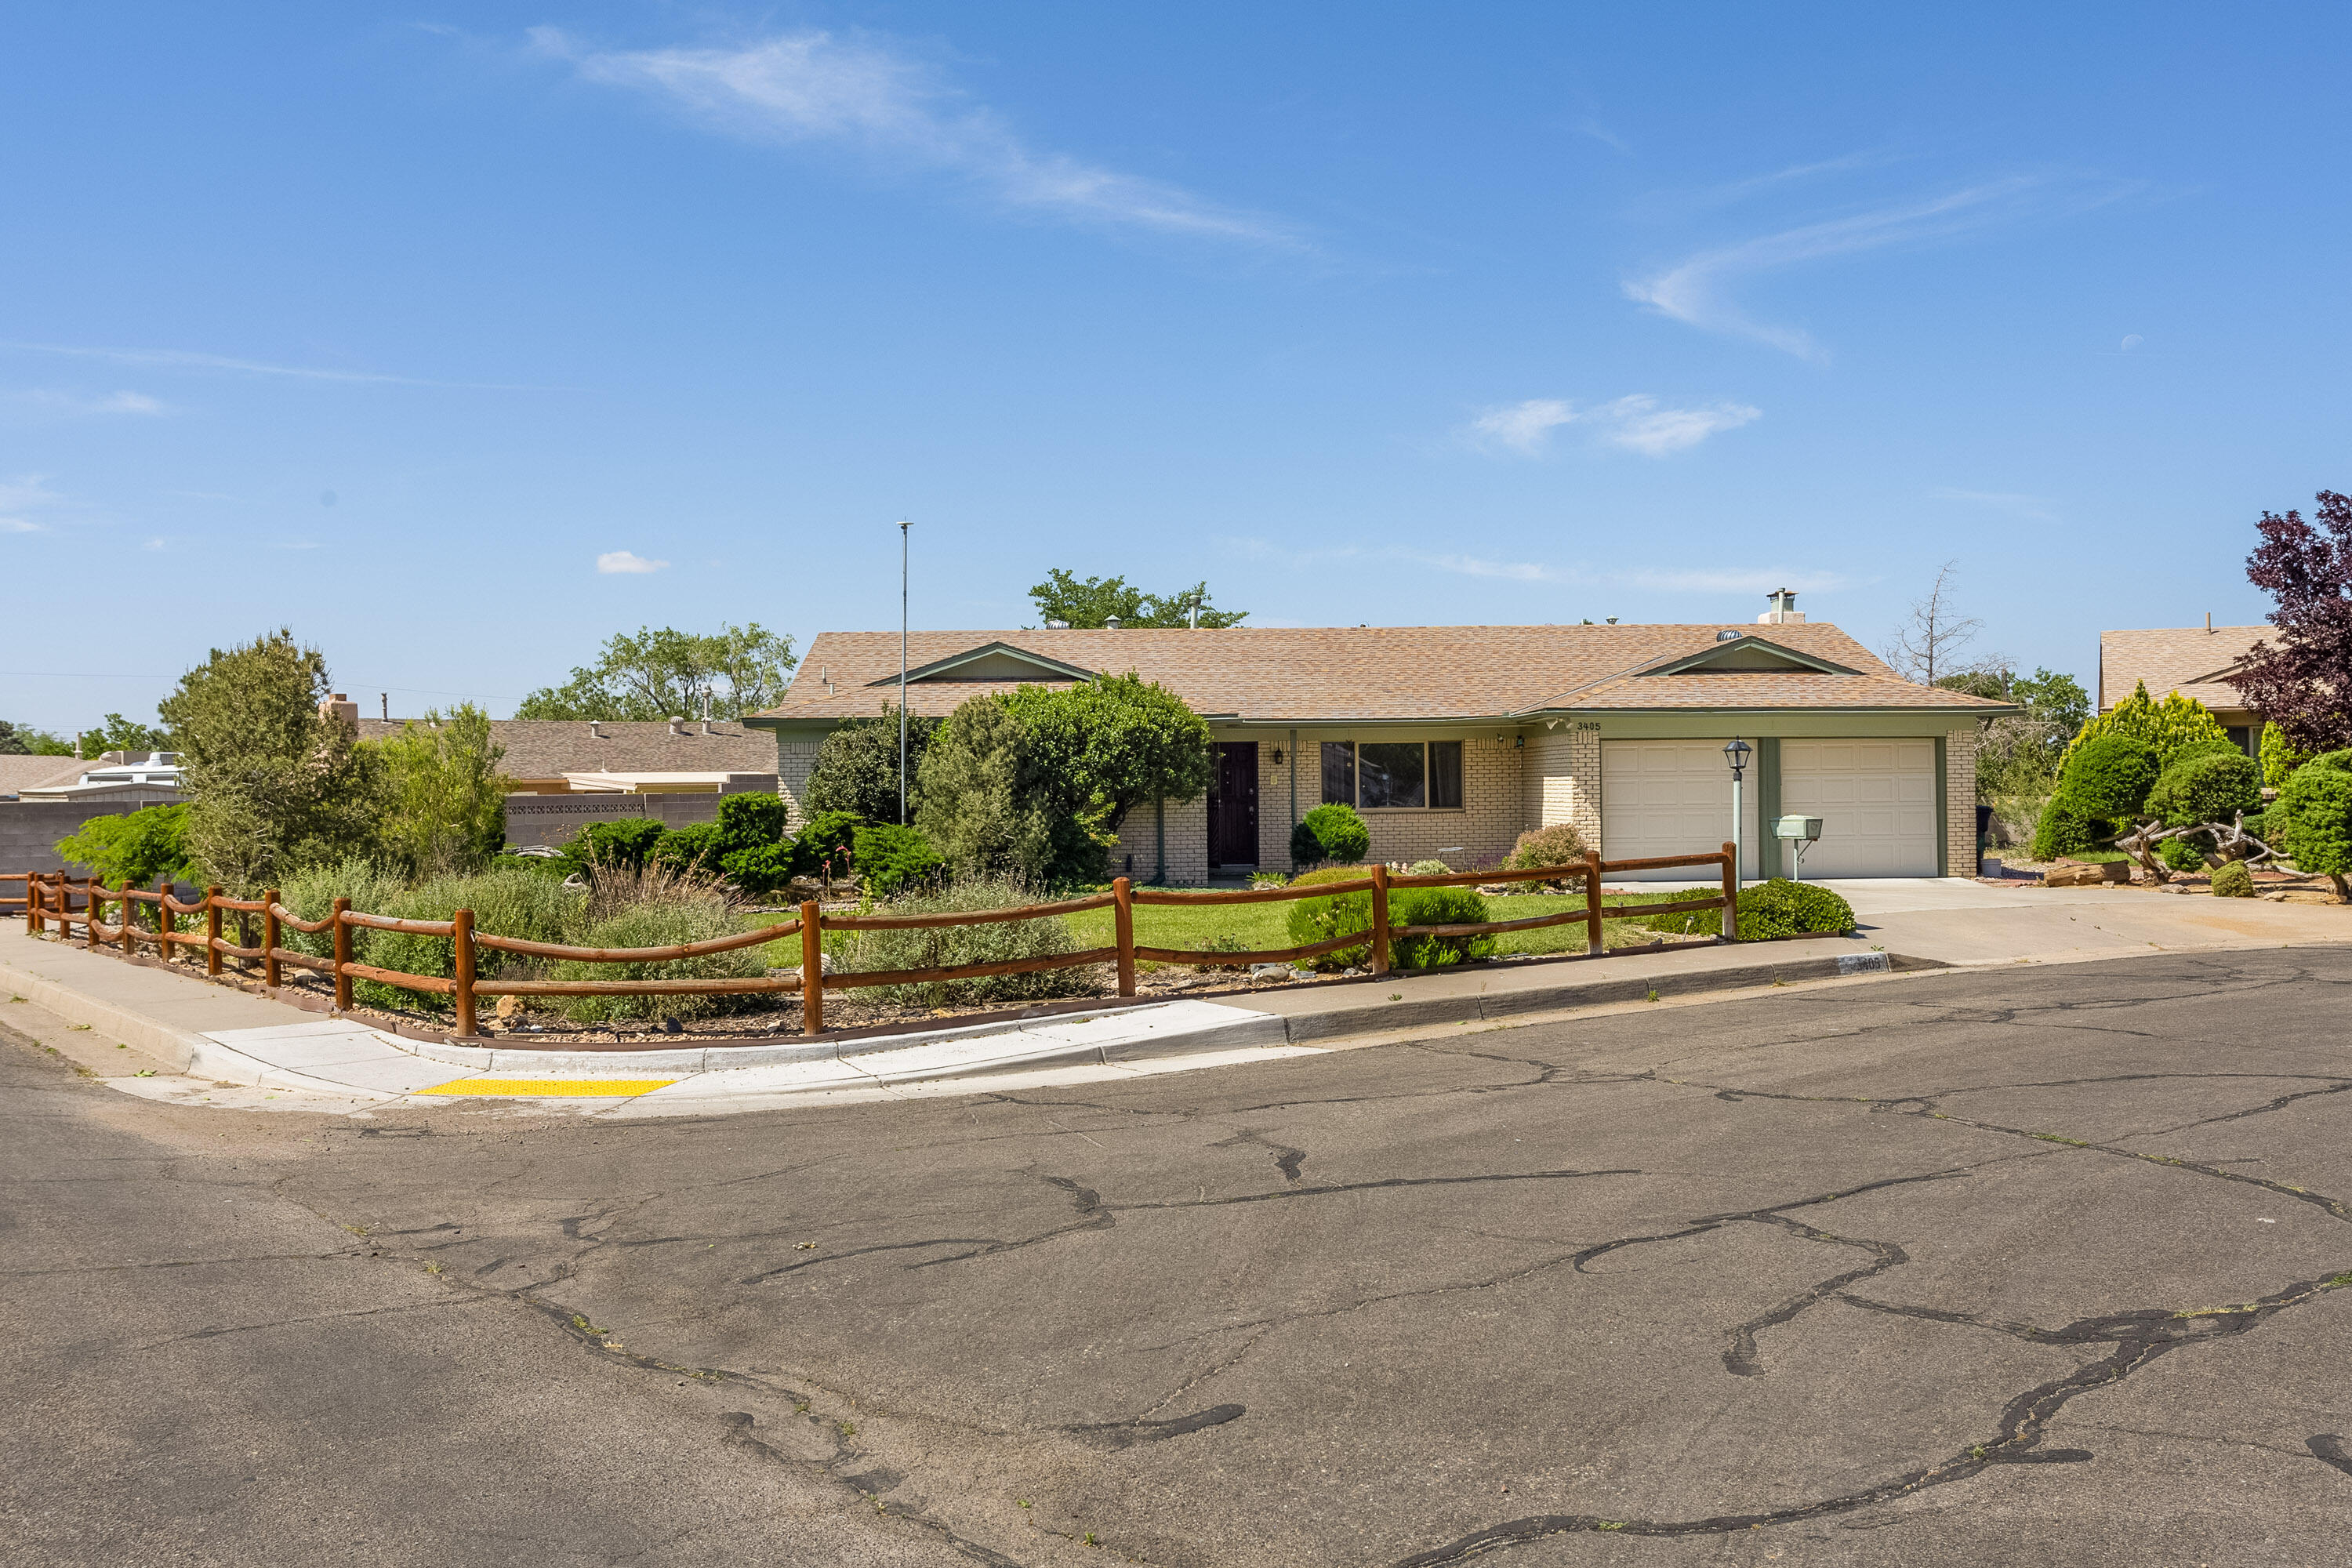 Welcome to this charming Holiday Park home situated on a large, corner lot in a cul-de-sac. This home has been lovingly cared for by the same owner for the last 40 years. Drive up to the excellently manicured front landscaping where you can see stunning views of the Sandias. This classic Rutledge/Brown floor plan boasts two living areas, a bay window and a light and bright kitchen with a window that overlooks the immaculate backyard. Outside you will find side-yard access with RV parking; a turf lawn for easy maintenance; beautiful rose bushes, a storage shed and a covered redwood deck. The lot and landscaping are the highlights of this home. Stay cool in the summer with refrigerated air & updated windows. The Bridges on Tramway is within walking distance, moments from schools, & grocery.